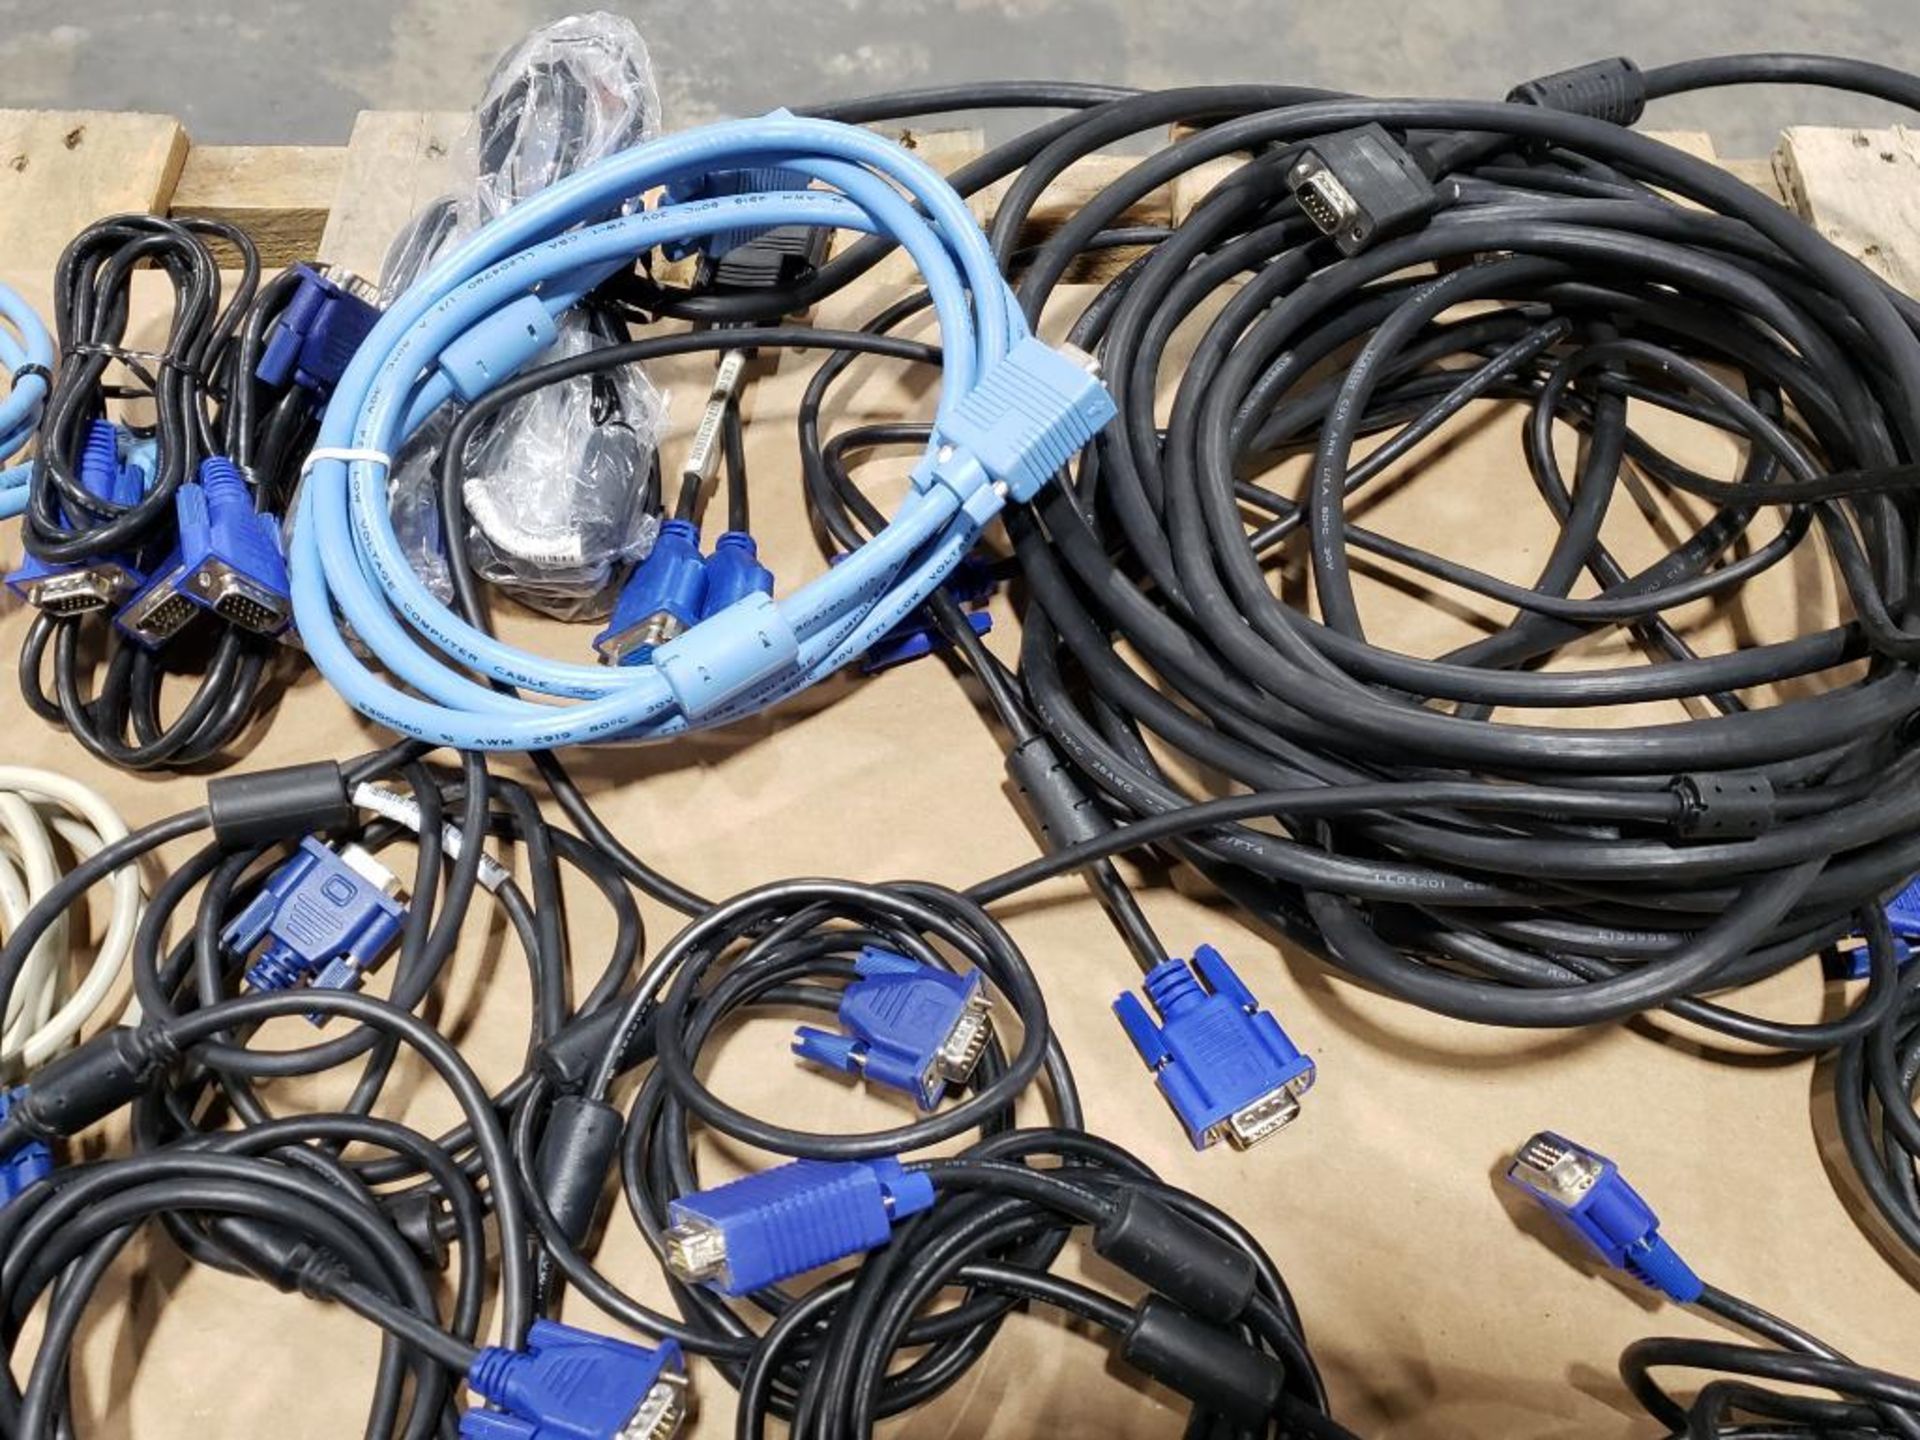 Large assortment of monitor cords. - Image 7 of 10